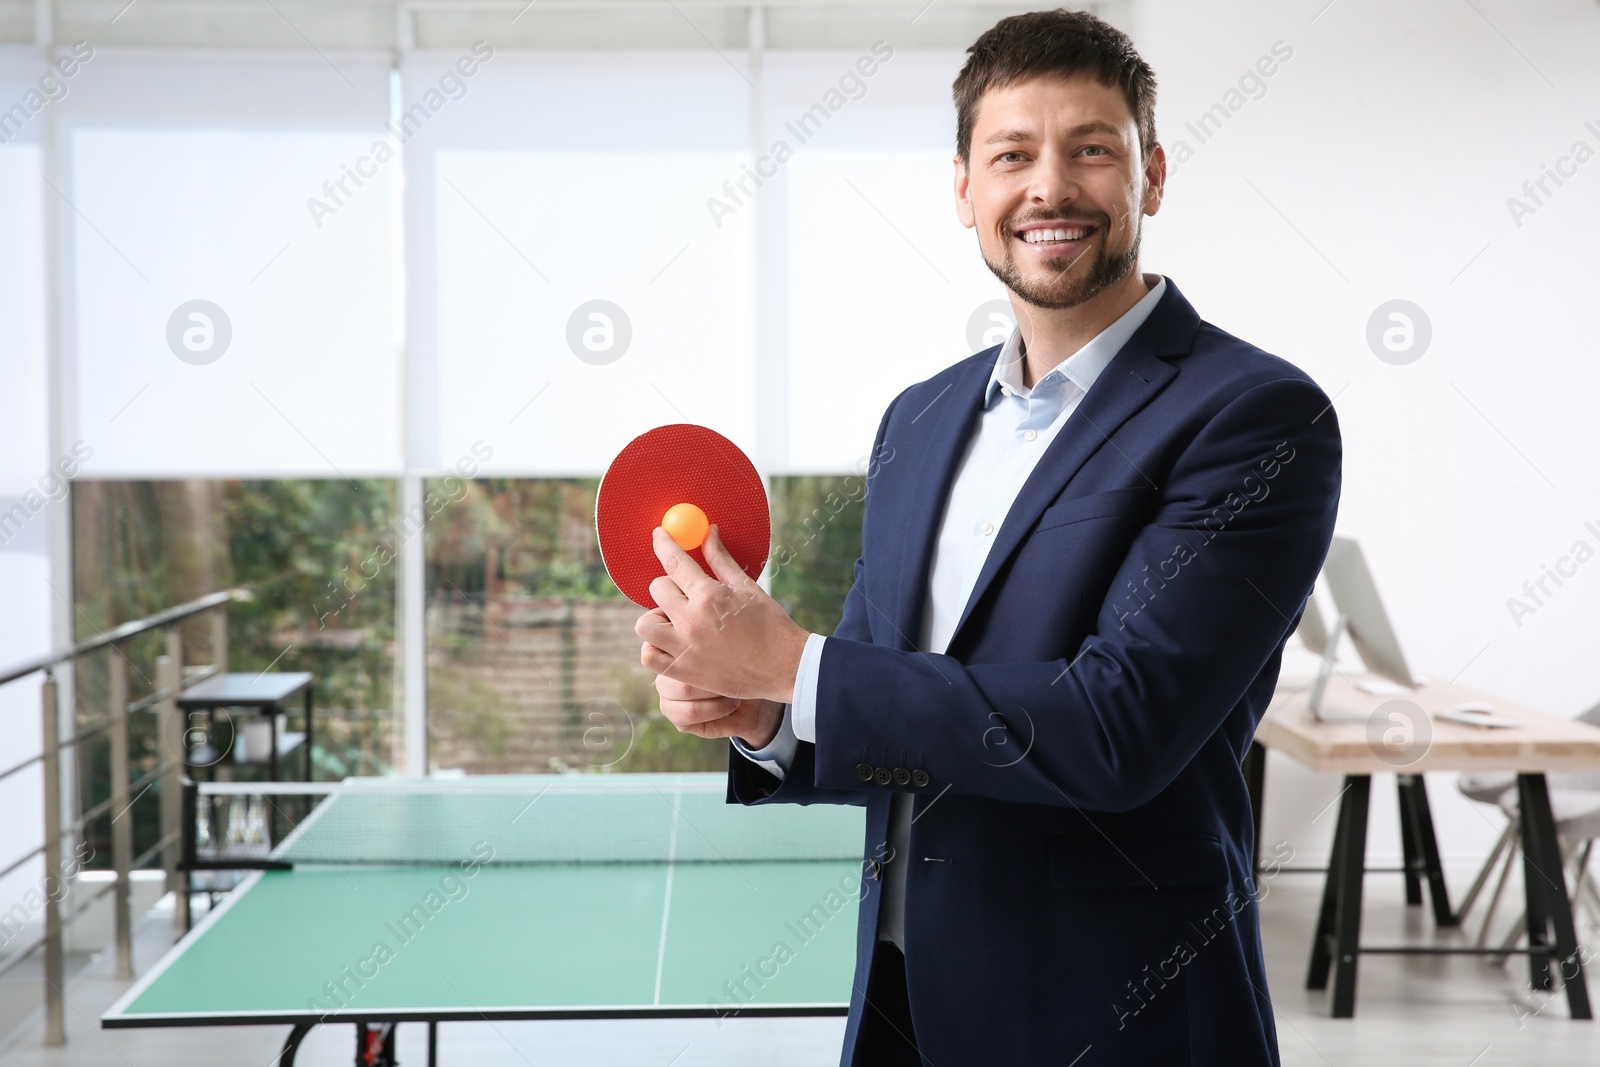 Photo of Businessman with tennis racket and ball near ping pong table in office